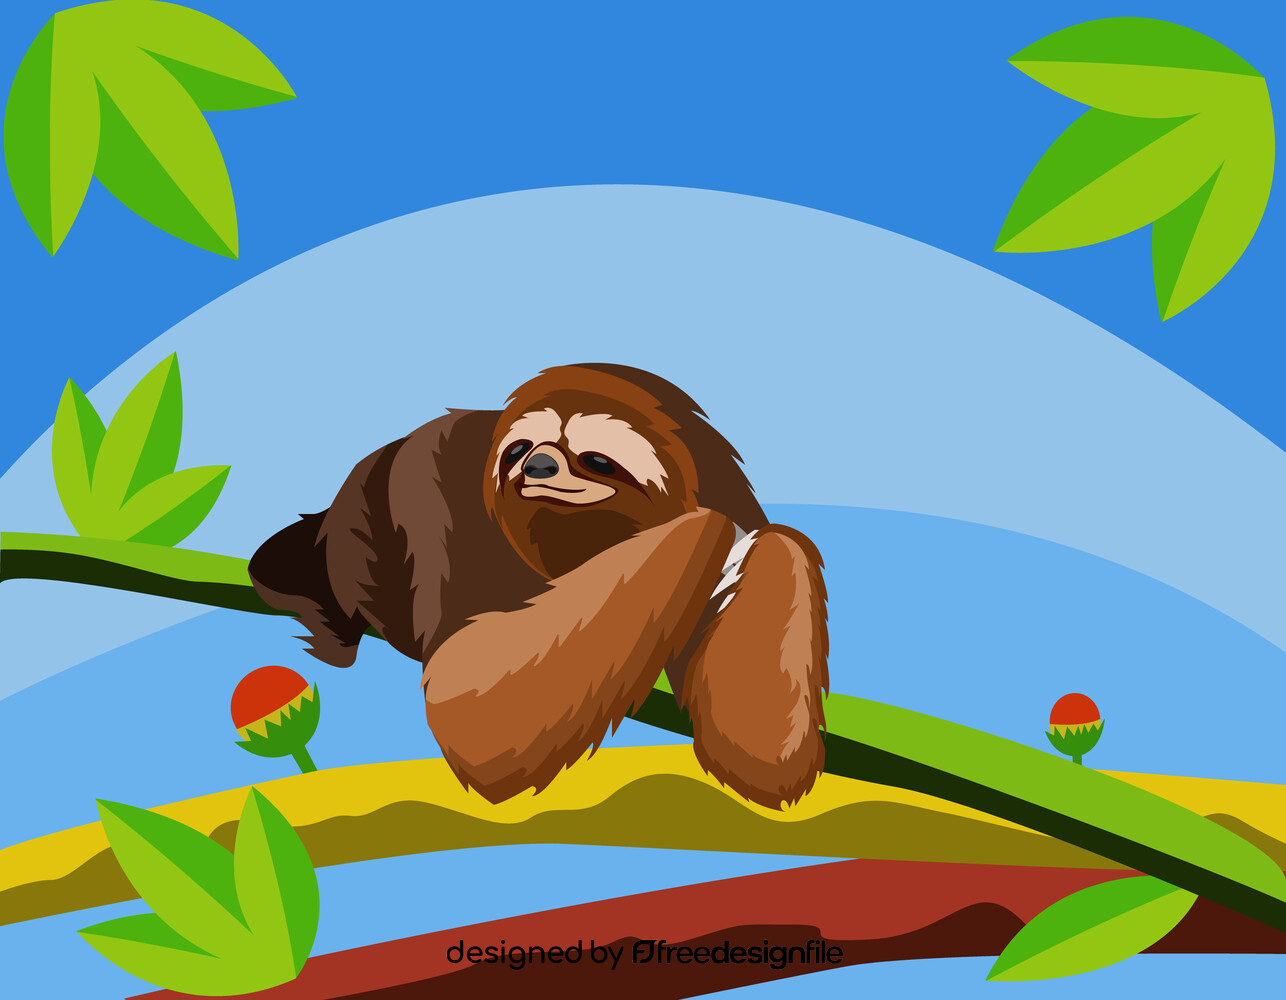 Sloth on a tree vector image